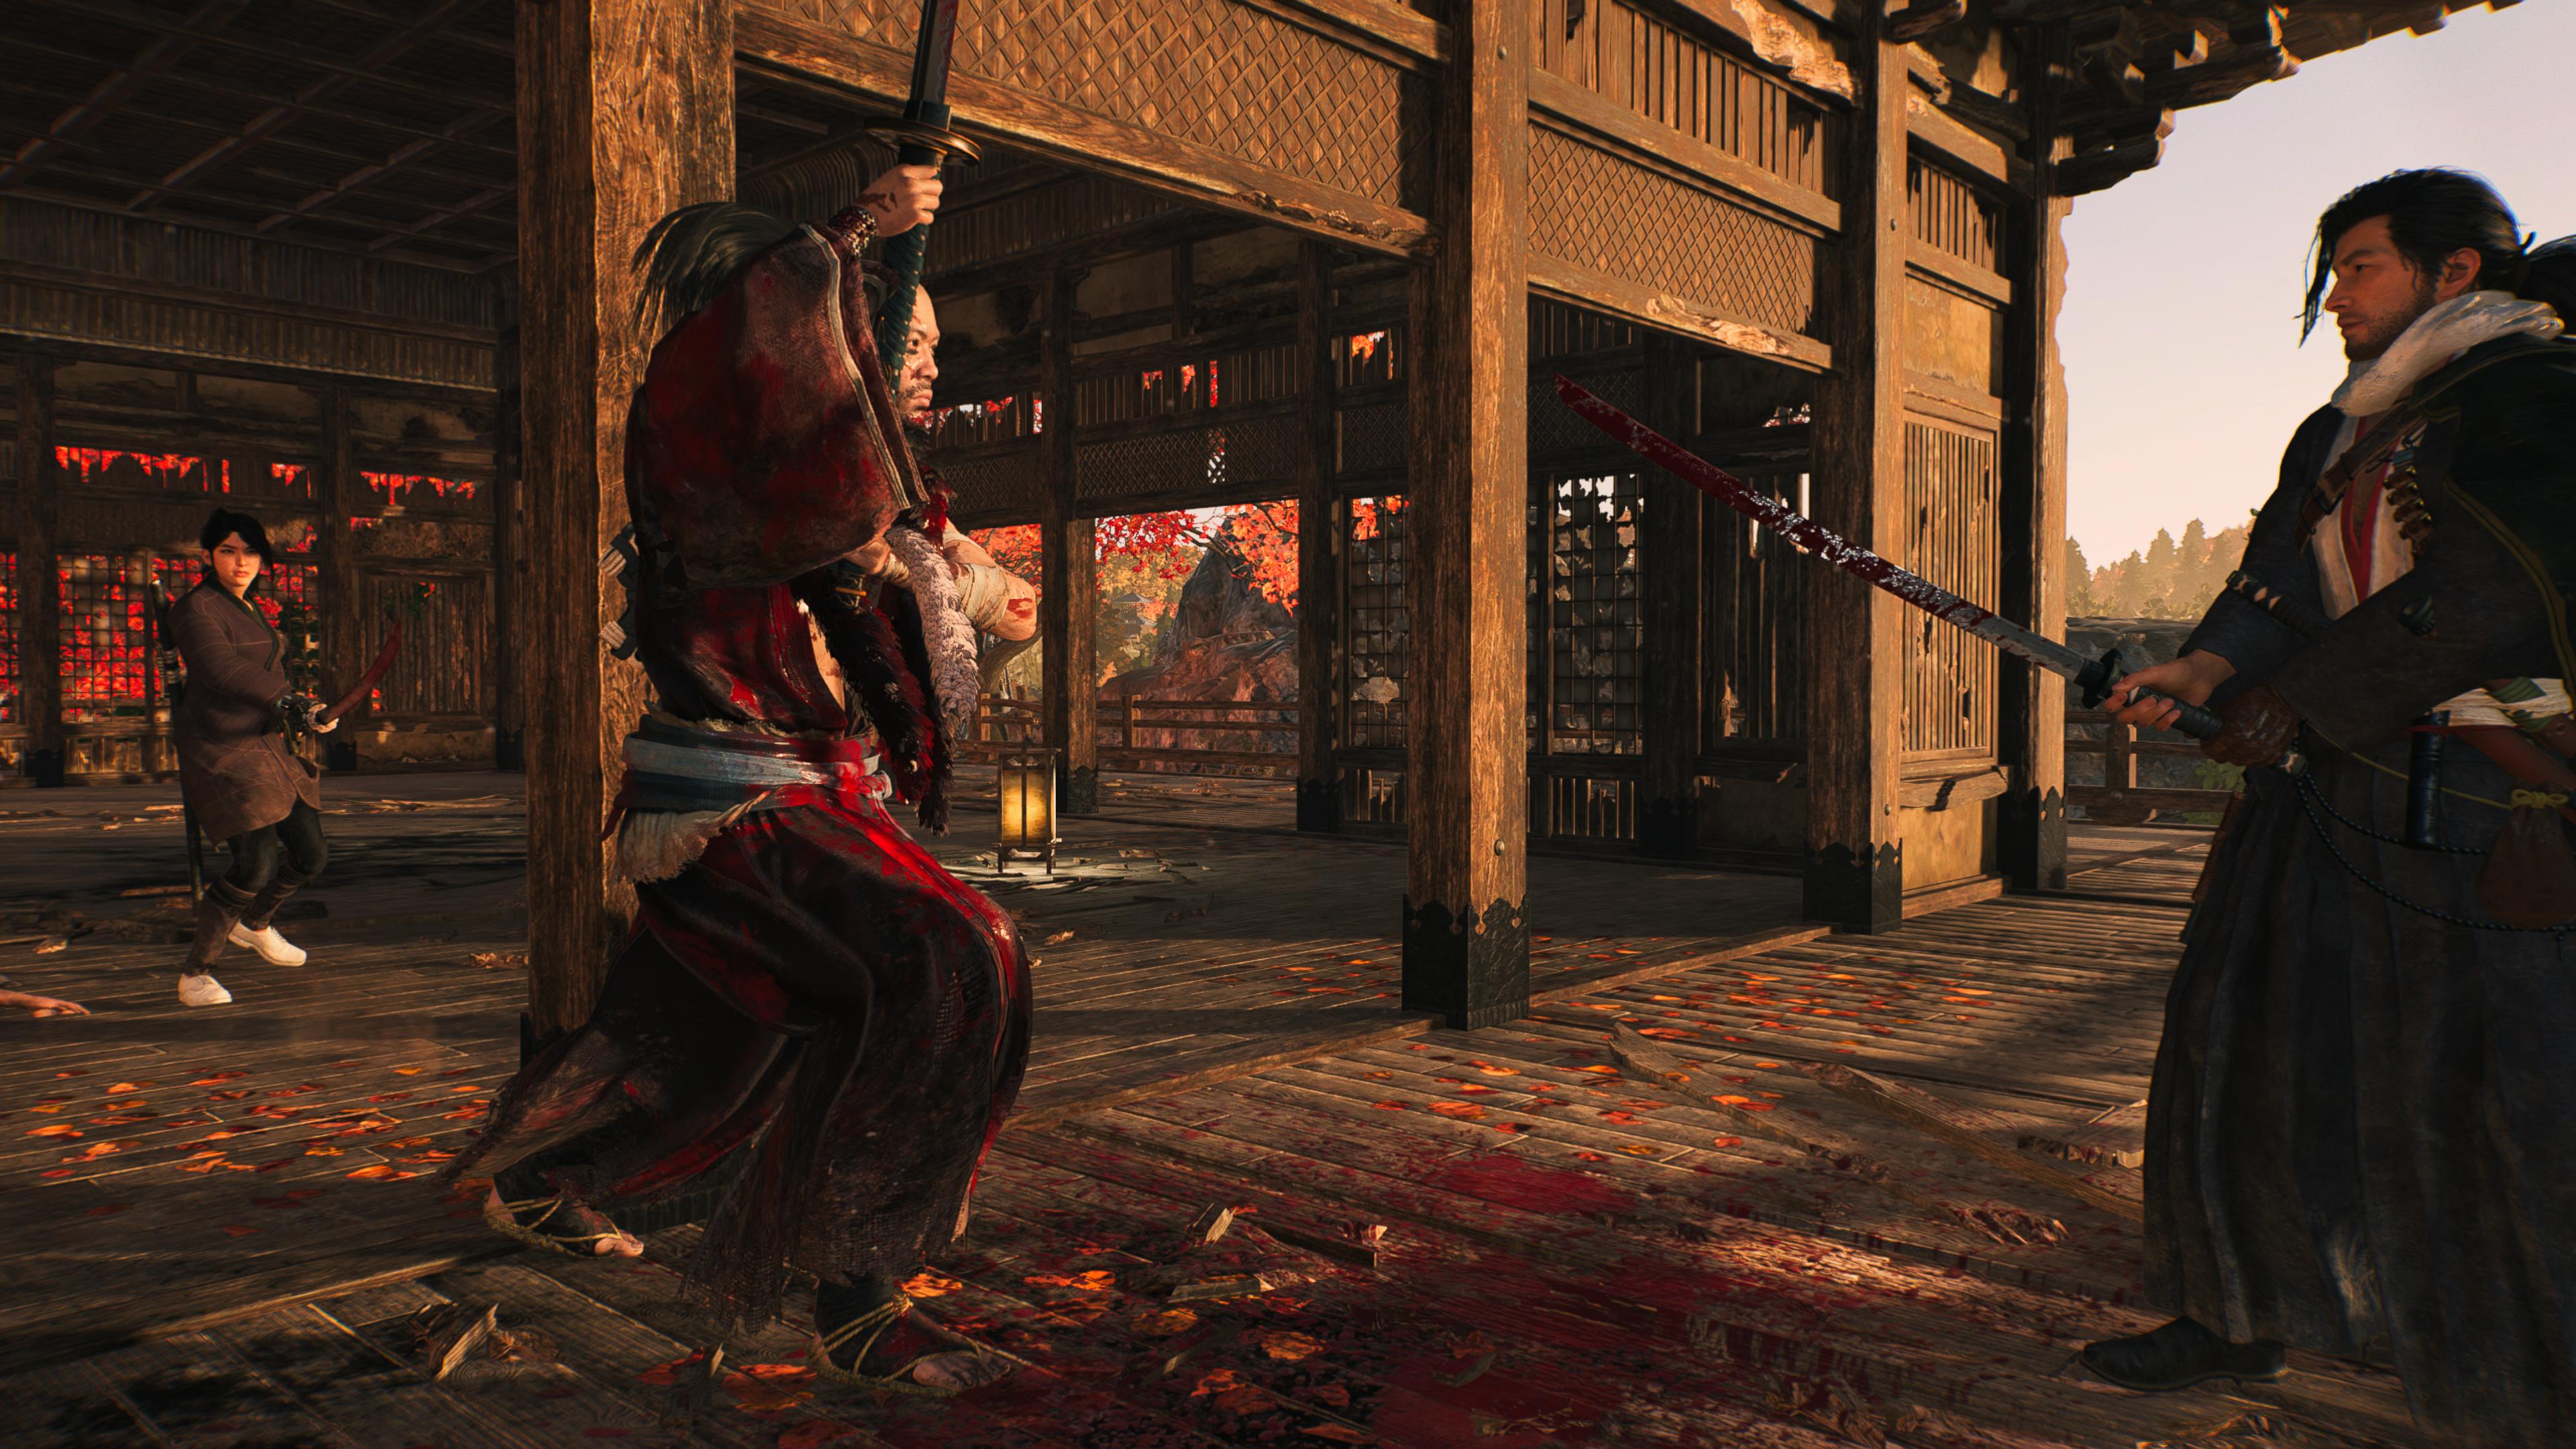 Reseña: Rise of the Ronin, ¿Vale la pena? 10